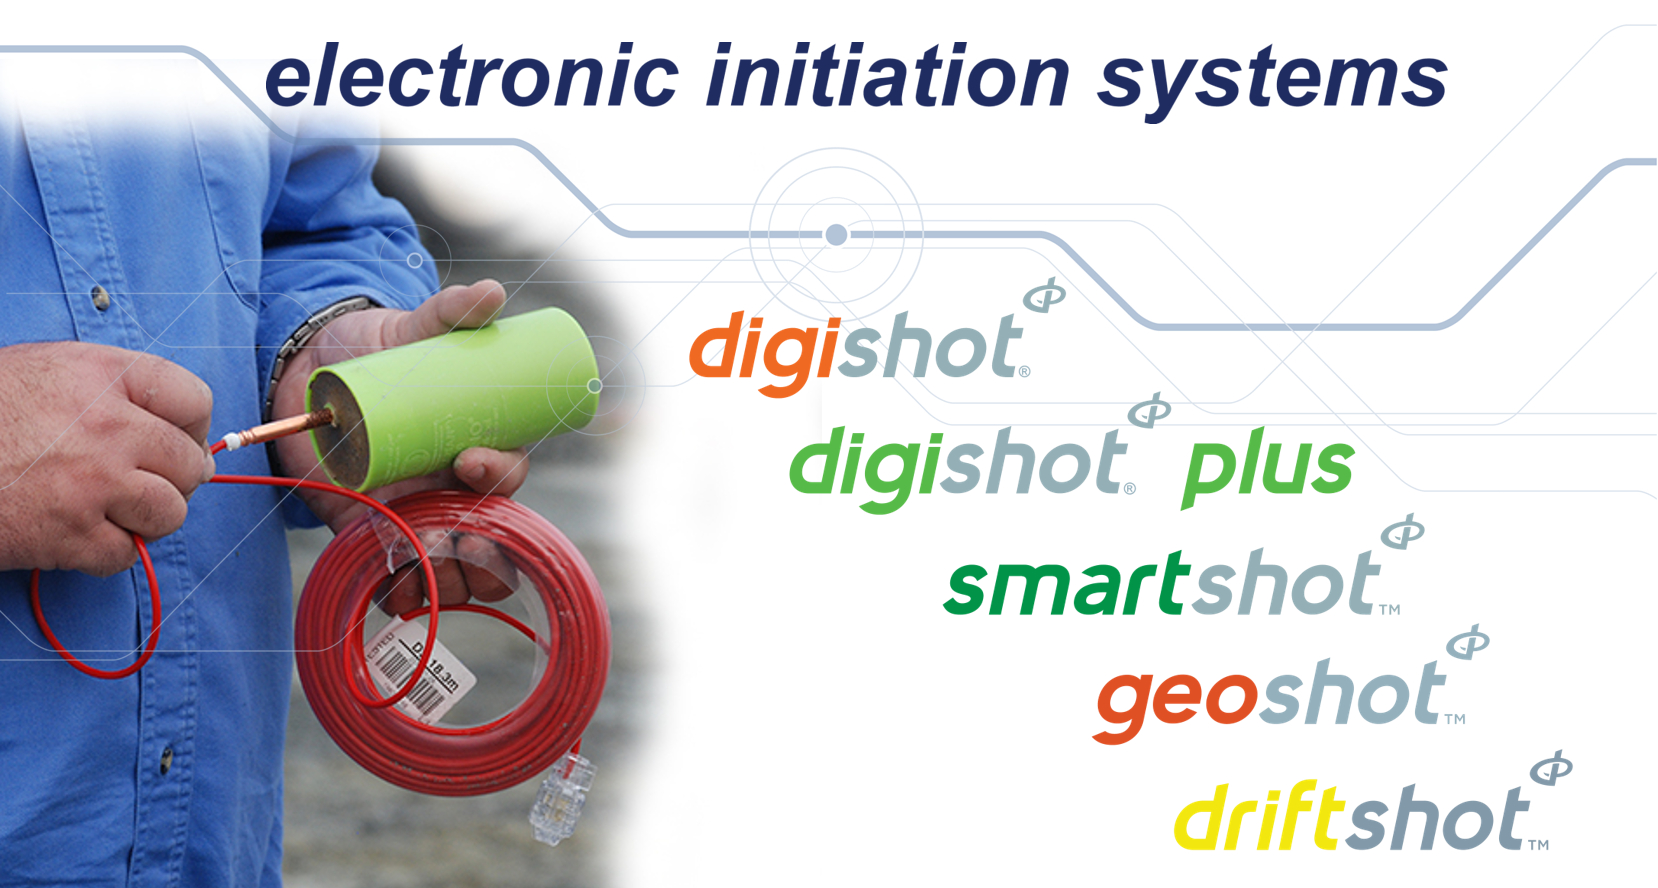 Dyno Nobel Electronic Initiation Systems